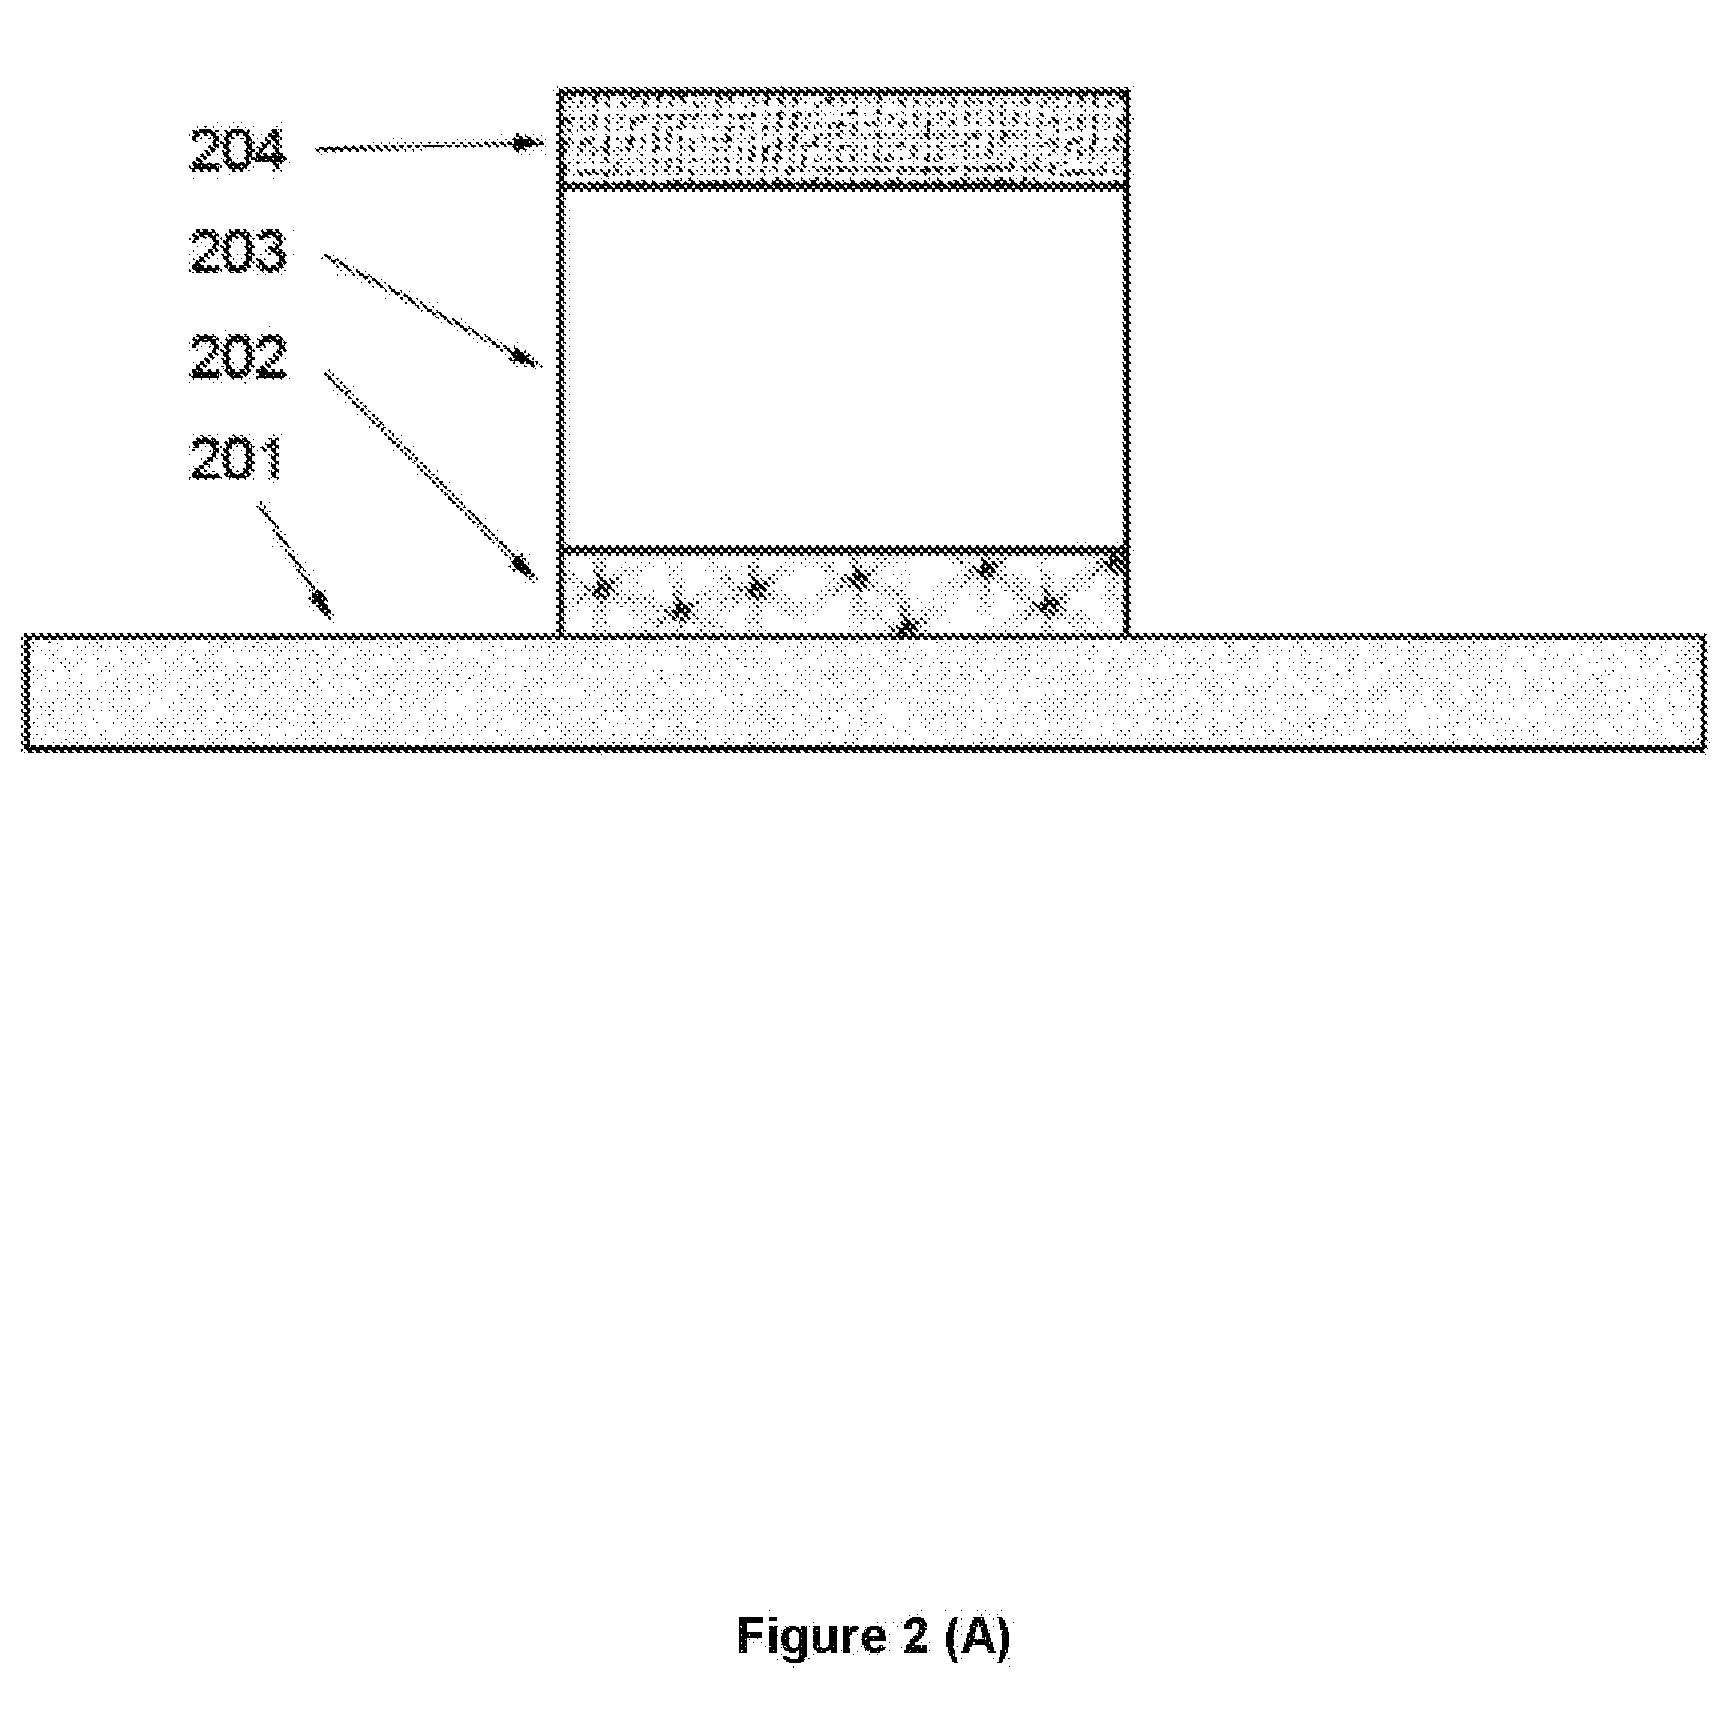 Light Emitting Diode Light Source With Layered Phosphor Conversion Coating